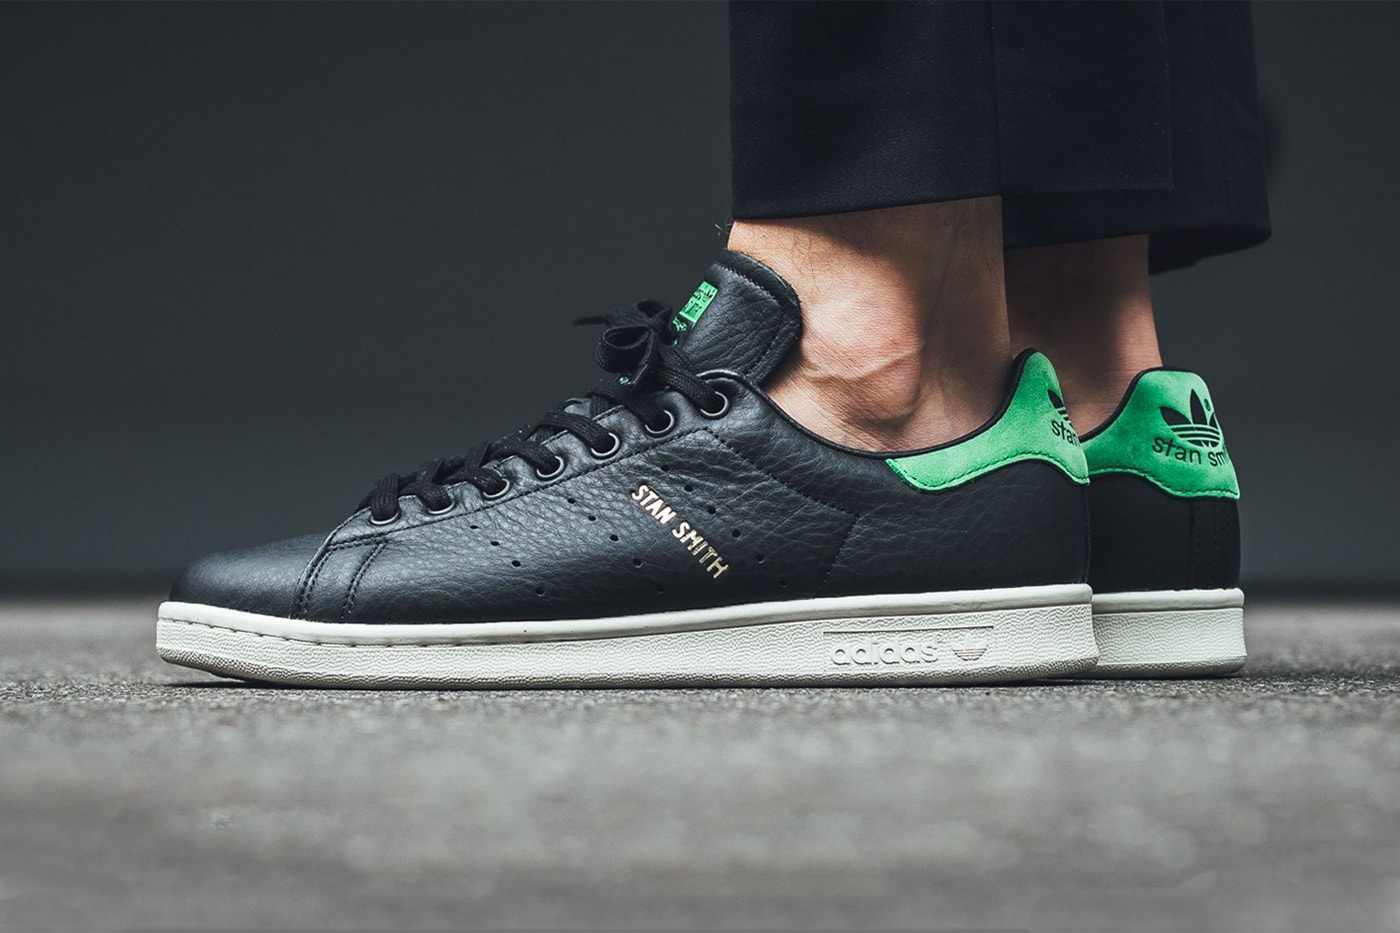 adidas Originals Stan Smith Core Black Green leather sneakers